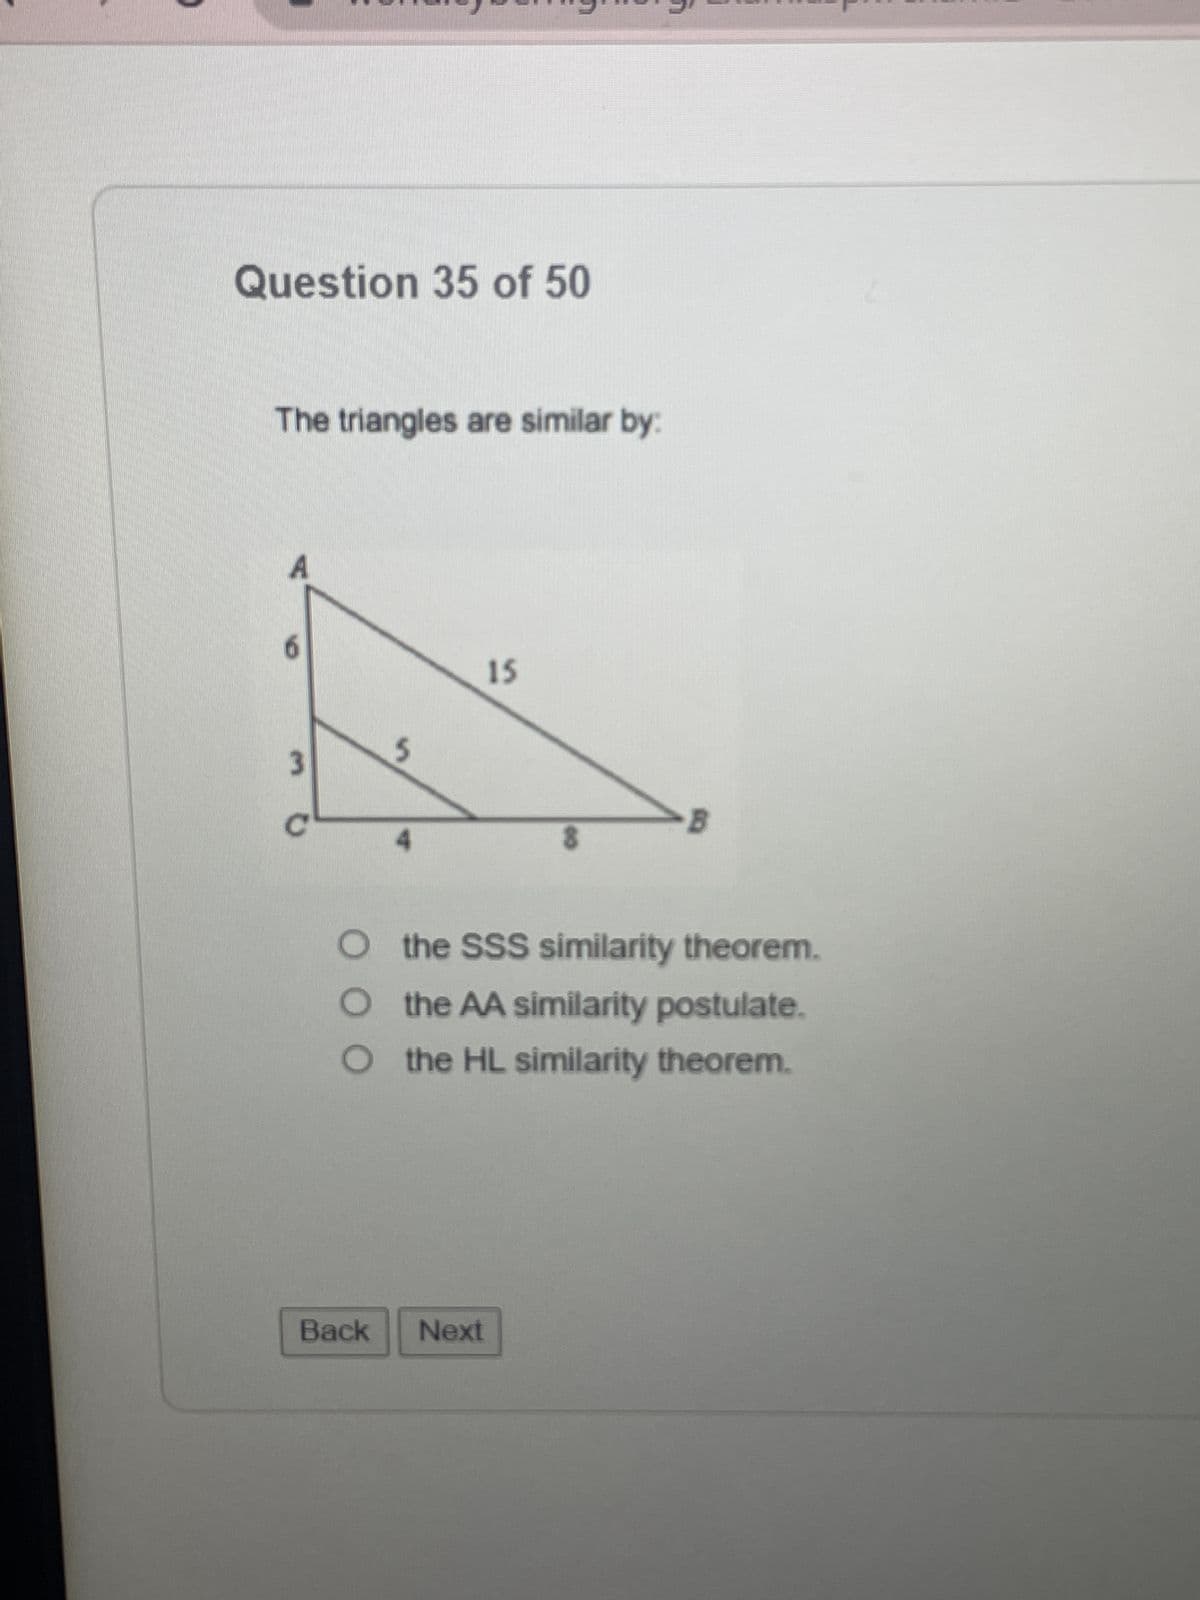 Question 35 of 50
The triangles are similar by:
3
Back
15
O the SSS similarity theorem.
the AA similarity postulate.
O the HL similarity theorem.
Next
B